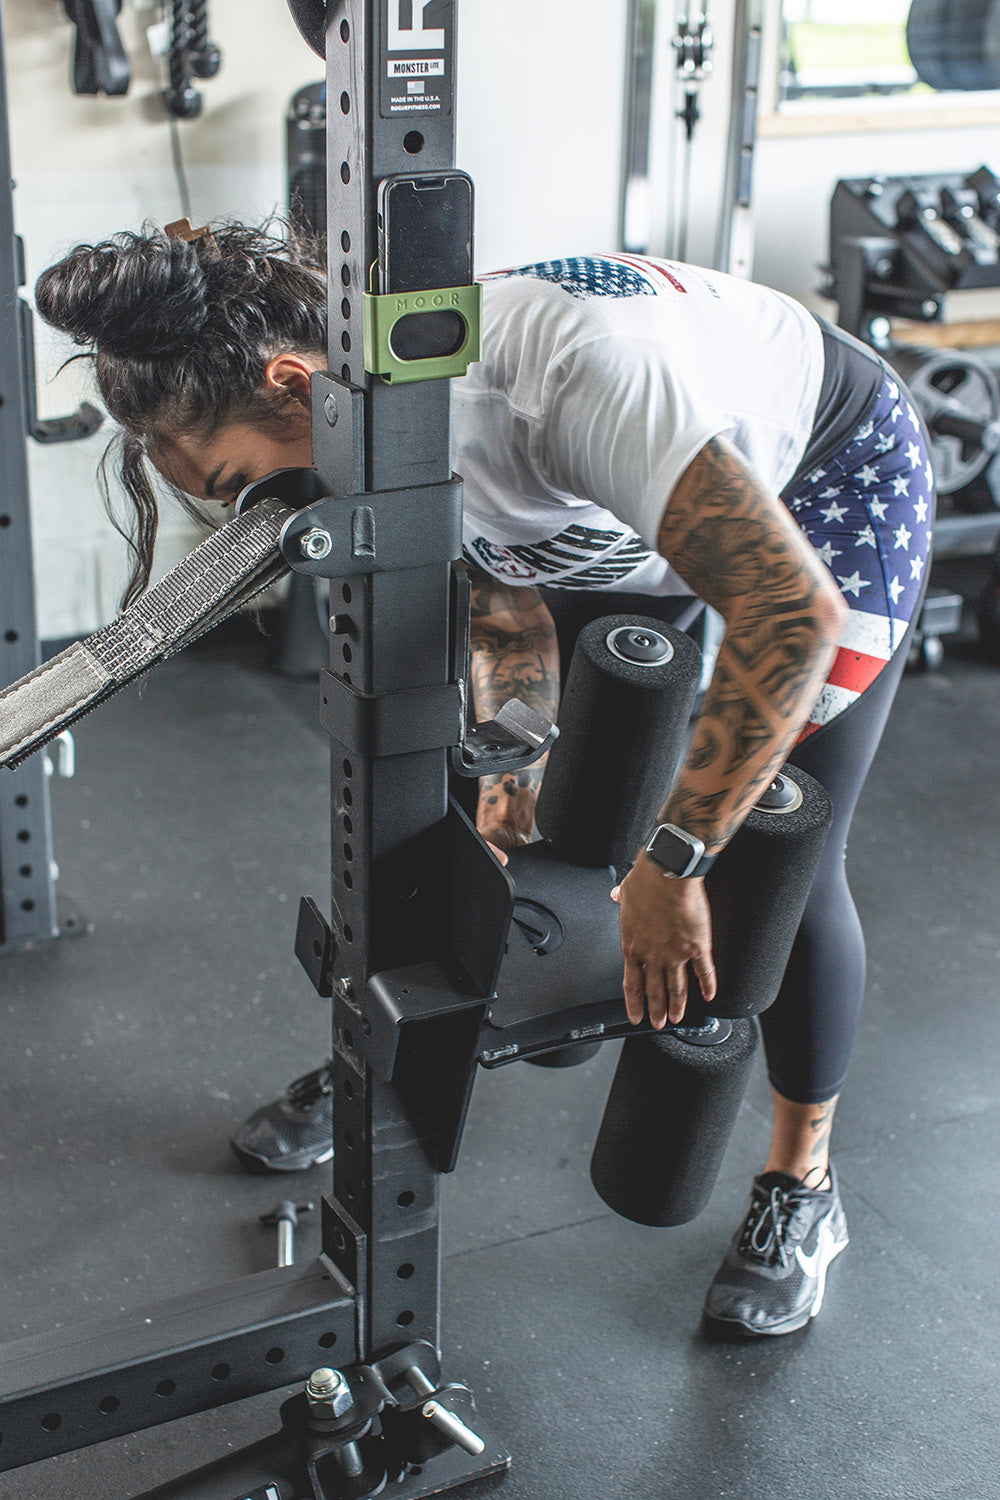 This Rack Mounted Glute Ham Developer is less bulky and lower priced than conventional GHDs. Perfect for glute workouts, ab workouts, and hamstring workouts. This image presents the Rack Mounted Glute Ham Developer being attached to a power rack in a home gym.